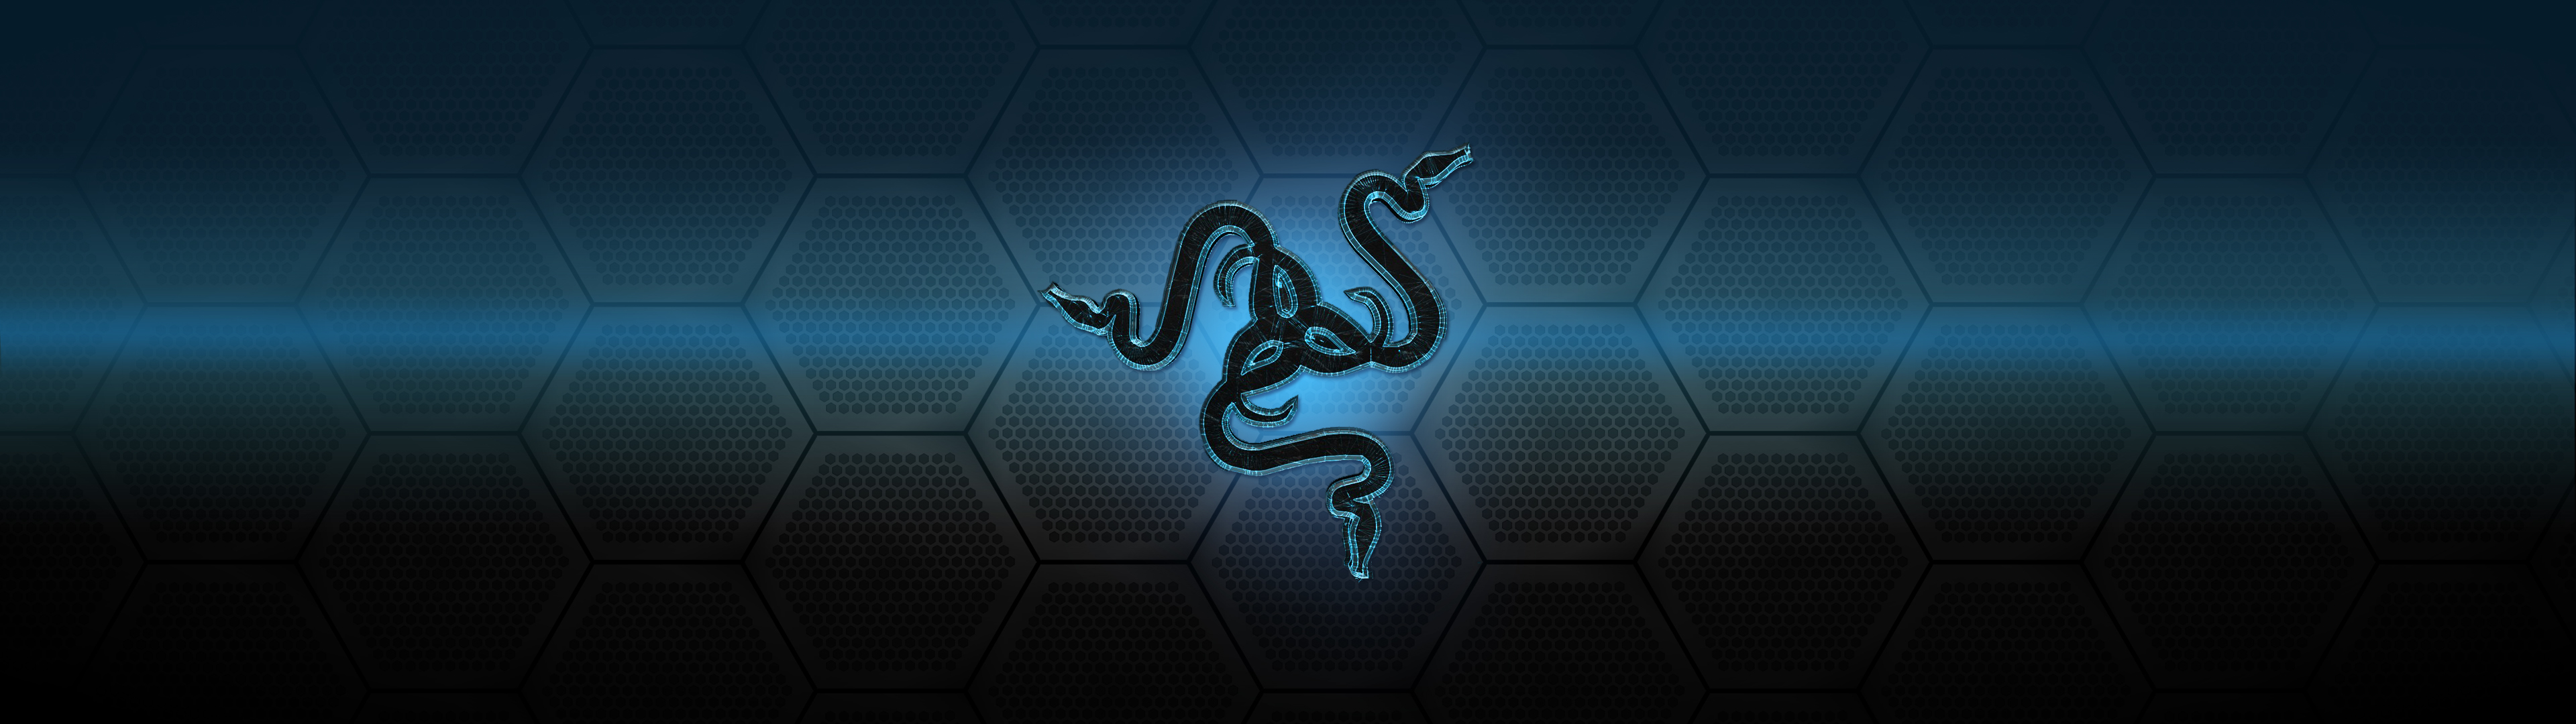 Razer Wallpaper By Wifsimster Customization Abstract